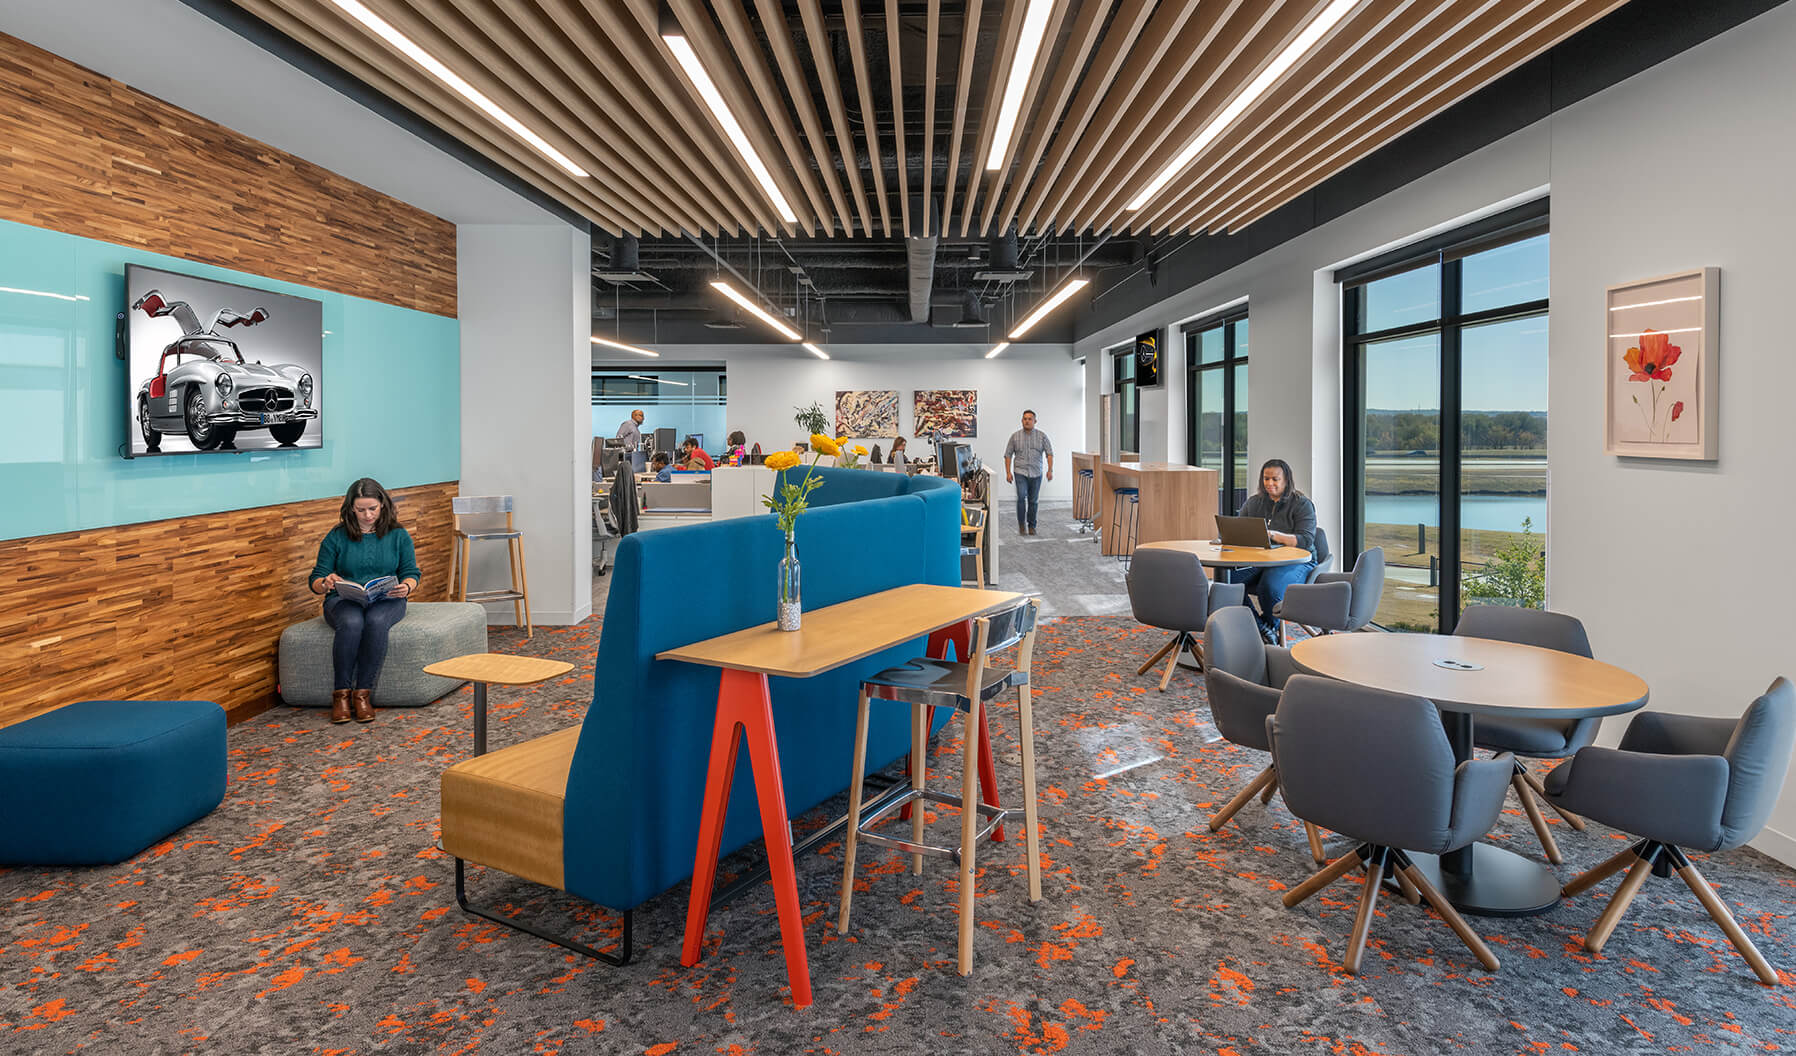 Ancillary spaces are available throughout the building to offer employees choice and variety. The Riverbend lounge seating—pictured center—provides separation and privacy and offers an architectural element that mimics the water landscape visible through the windows. 